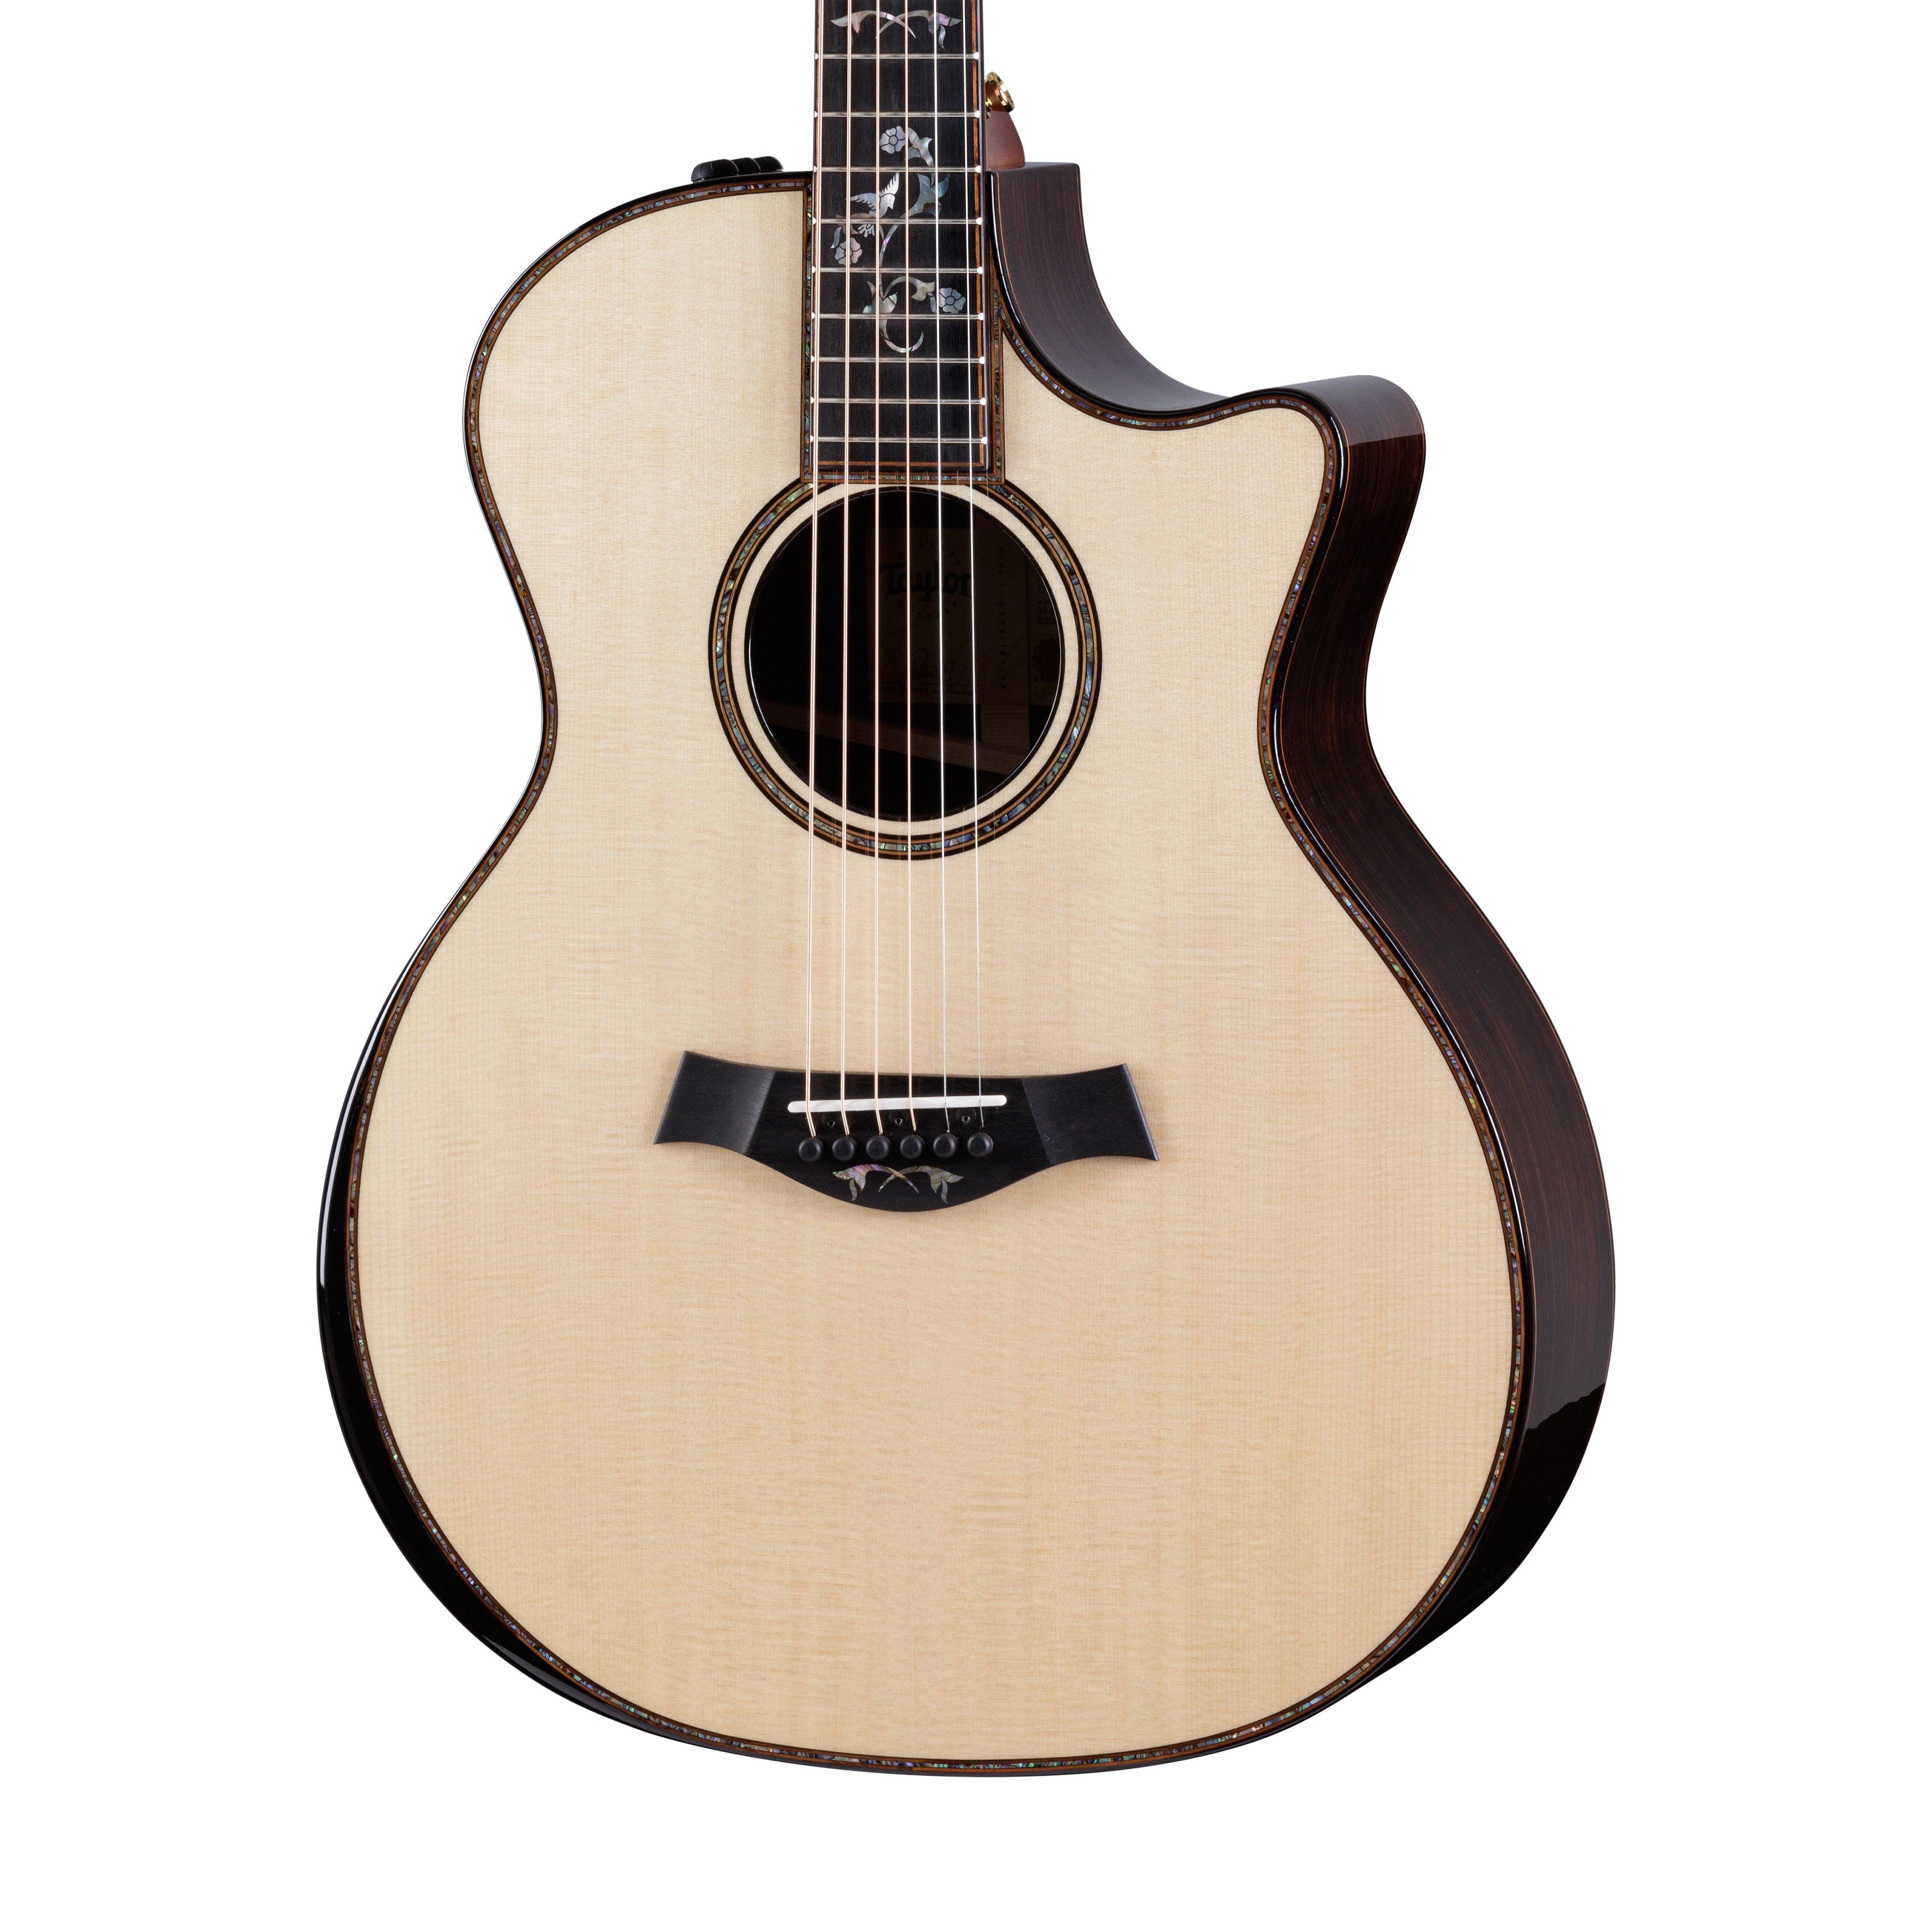 Taylor 914ce Special Edition RW/Redwood Grand Auditorium Acoustic Guitar w/Case, Cindy Inlay | Zoso Music Sdn Bhd